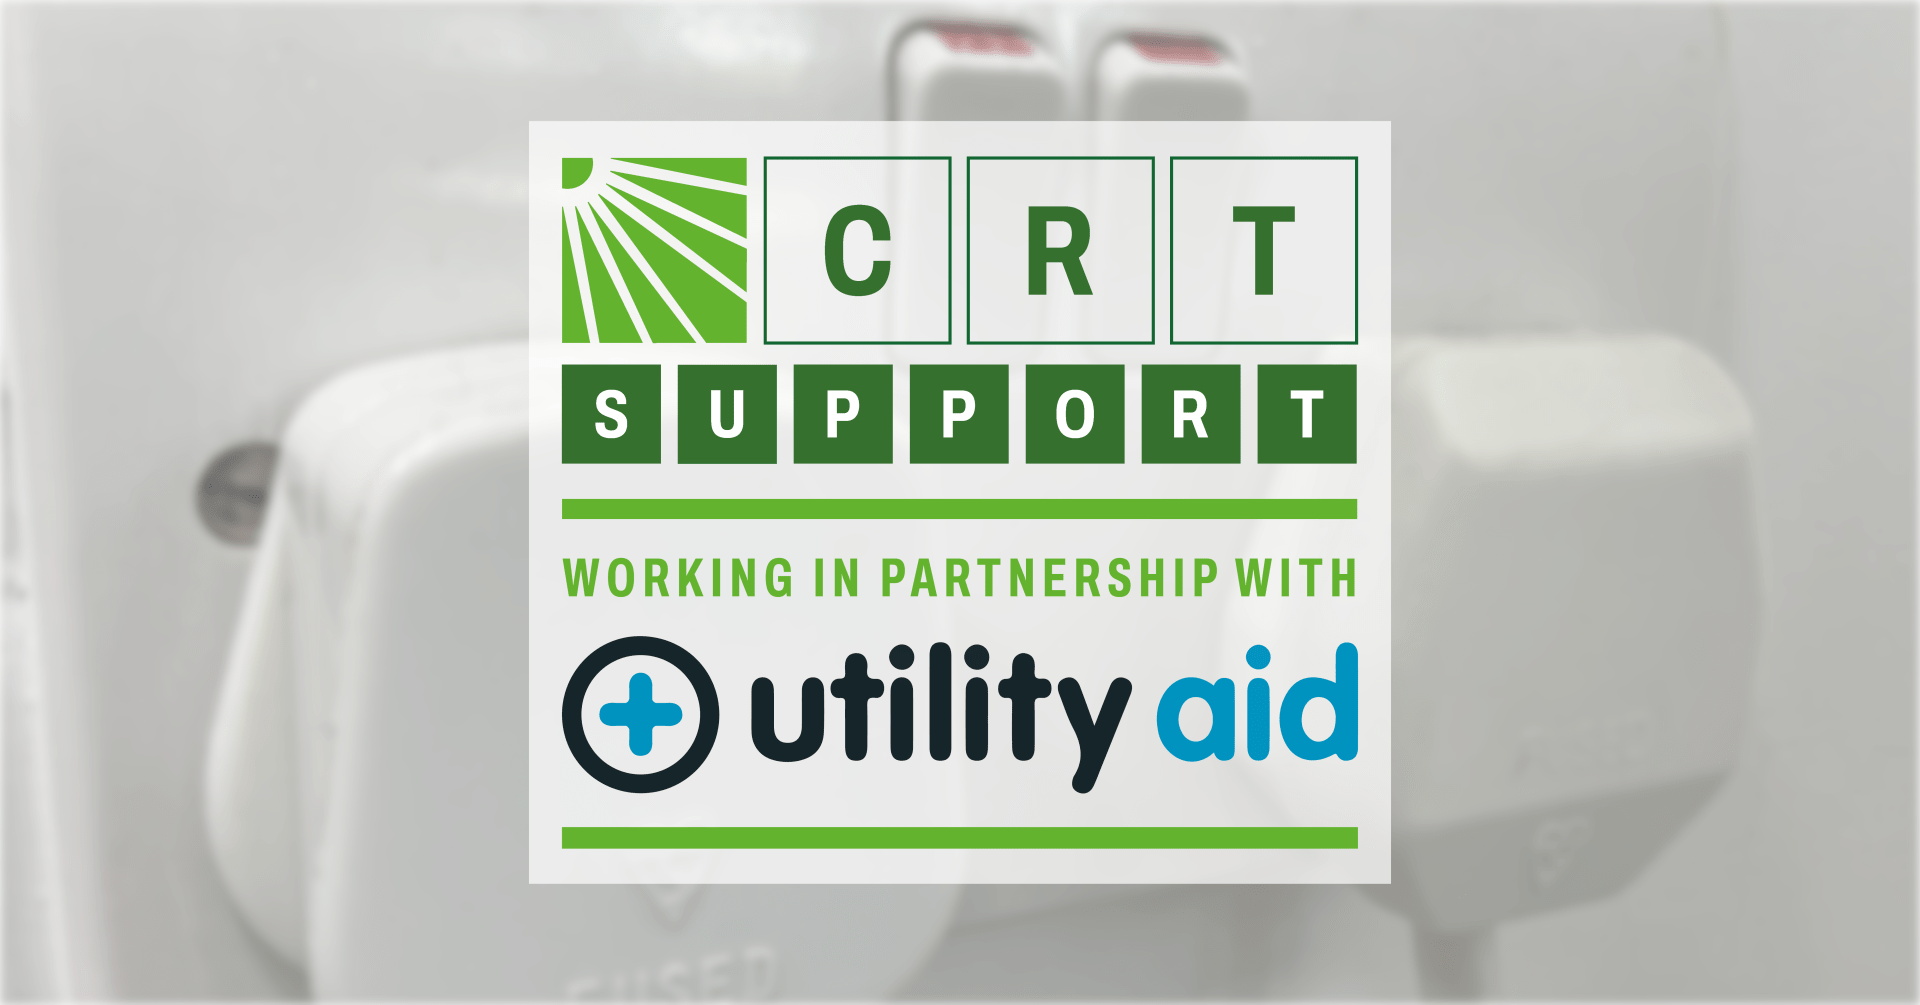 CRT Support working in partnership with Utility Aid